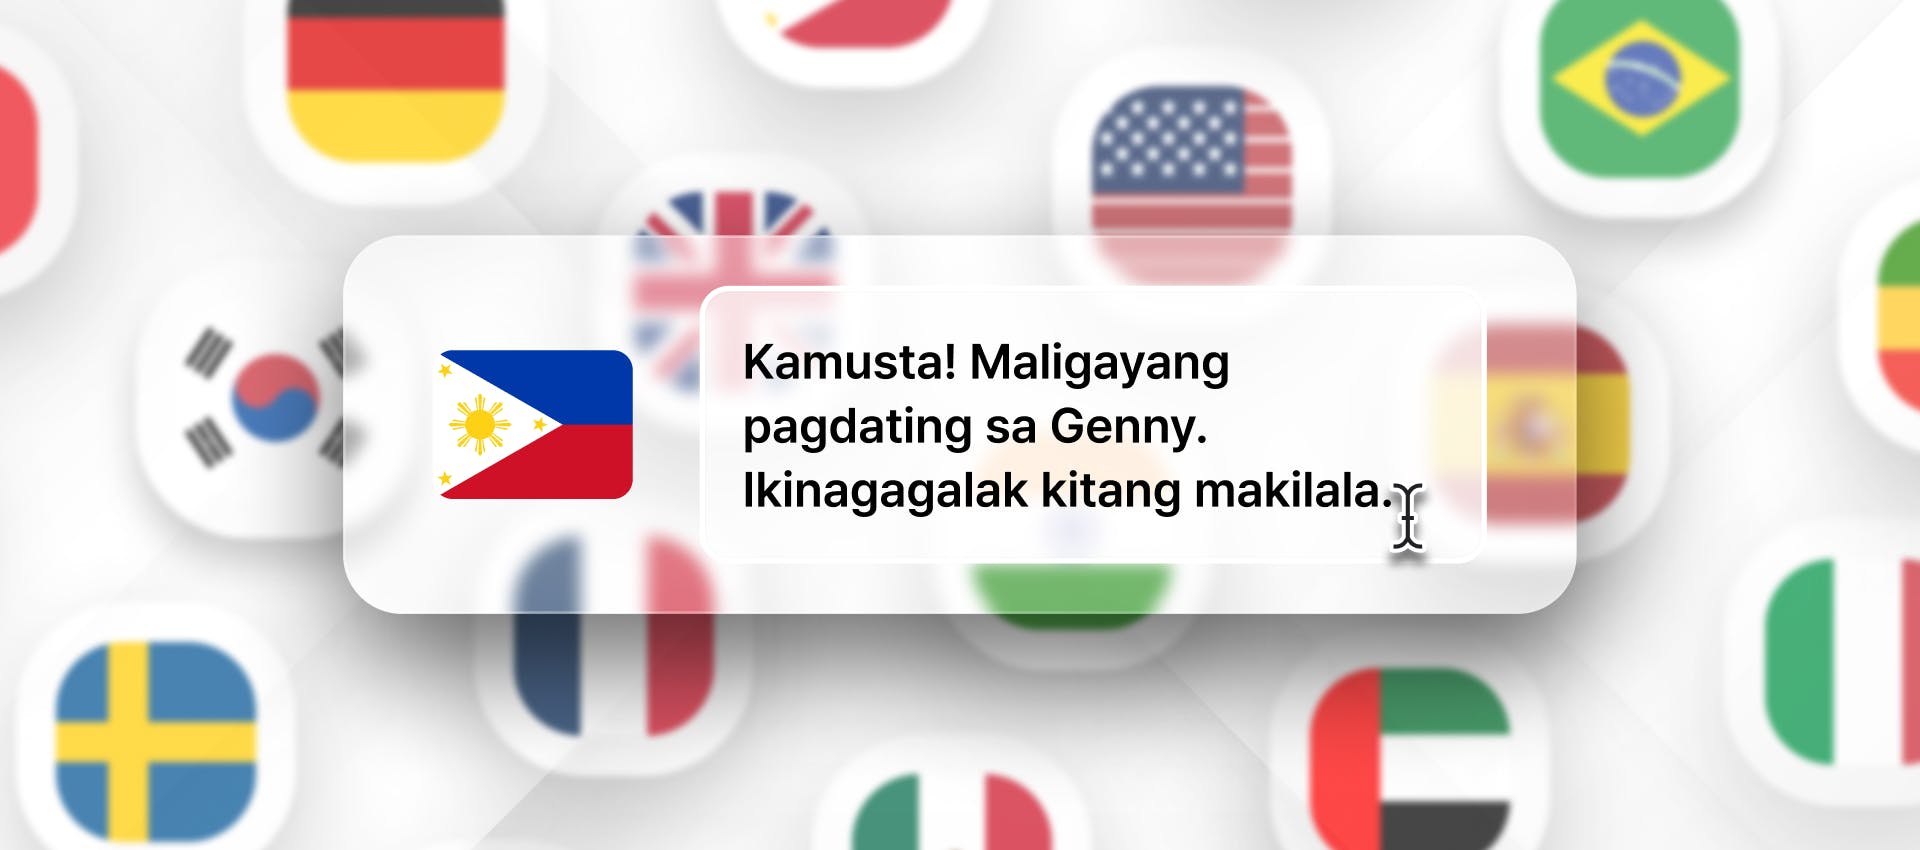 Tagalog phrase for TTS generation with different flags in the background